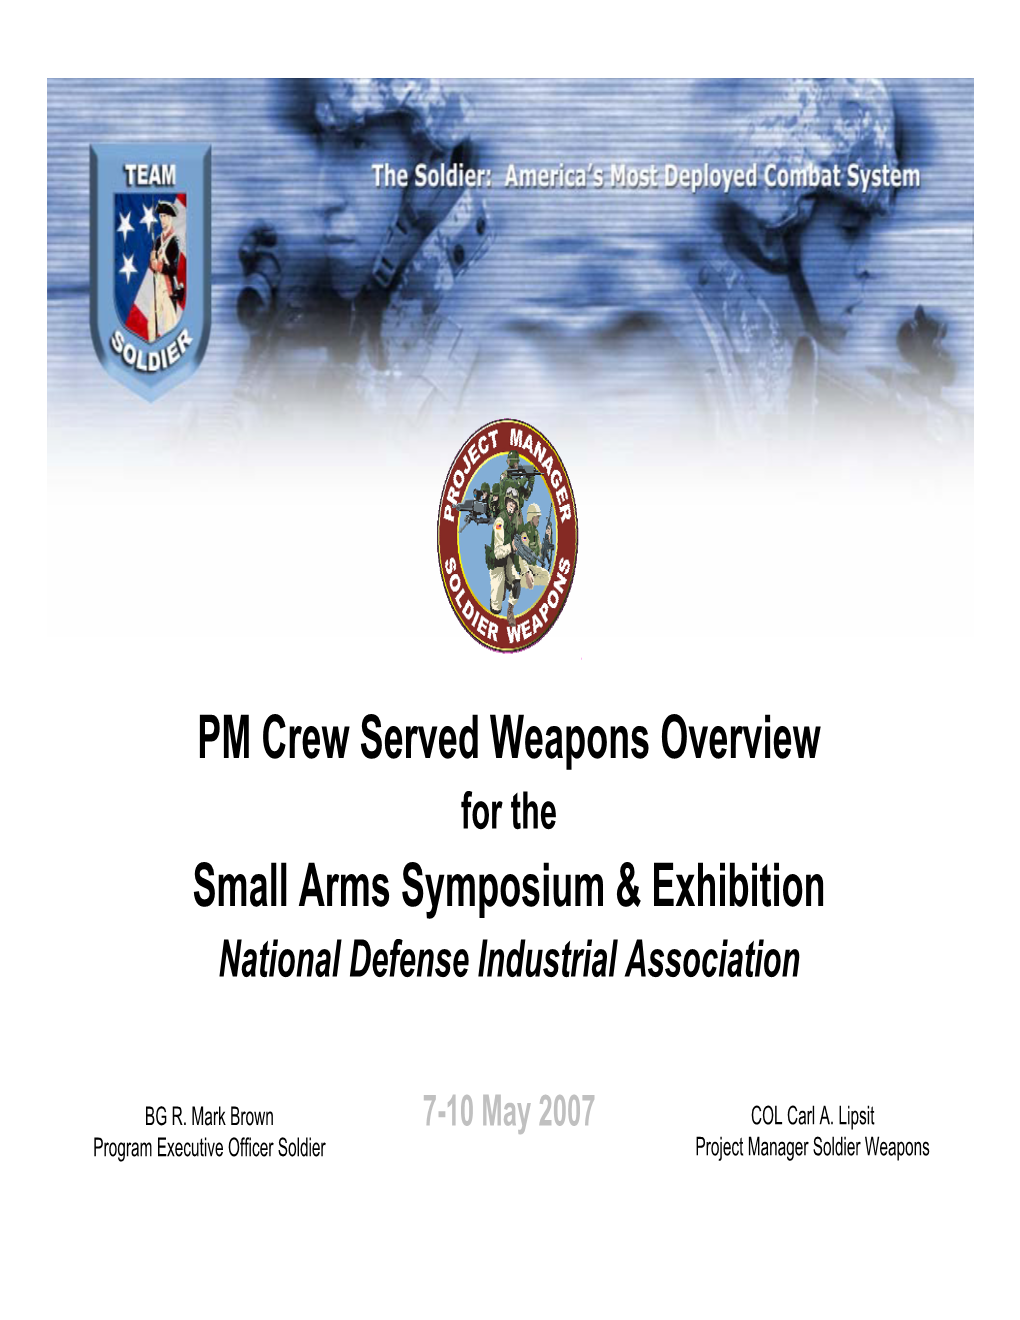 PM Crew Served Weapons Overview Small Arms Symposium & Exhibition